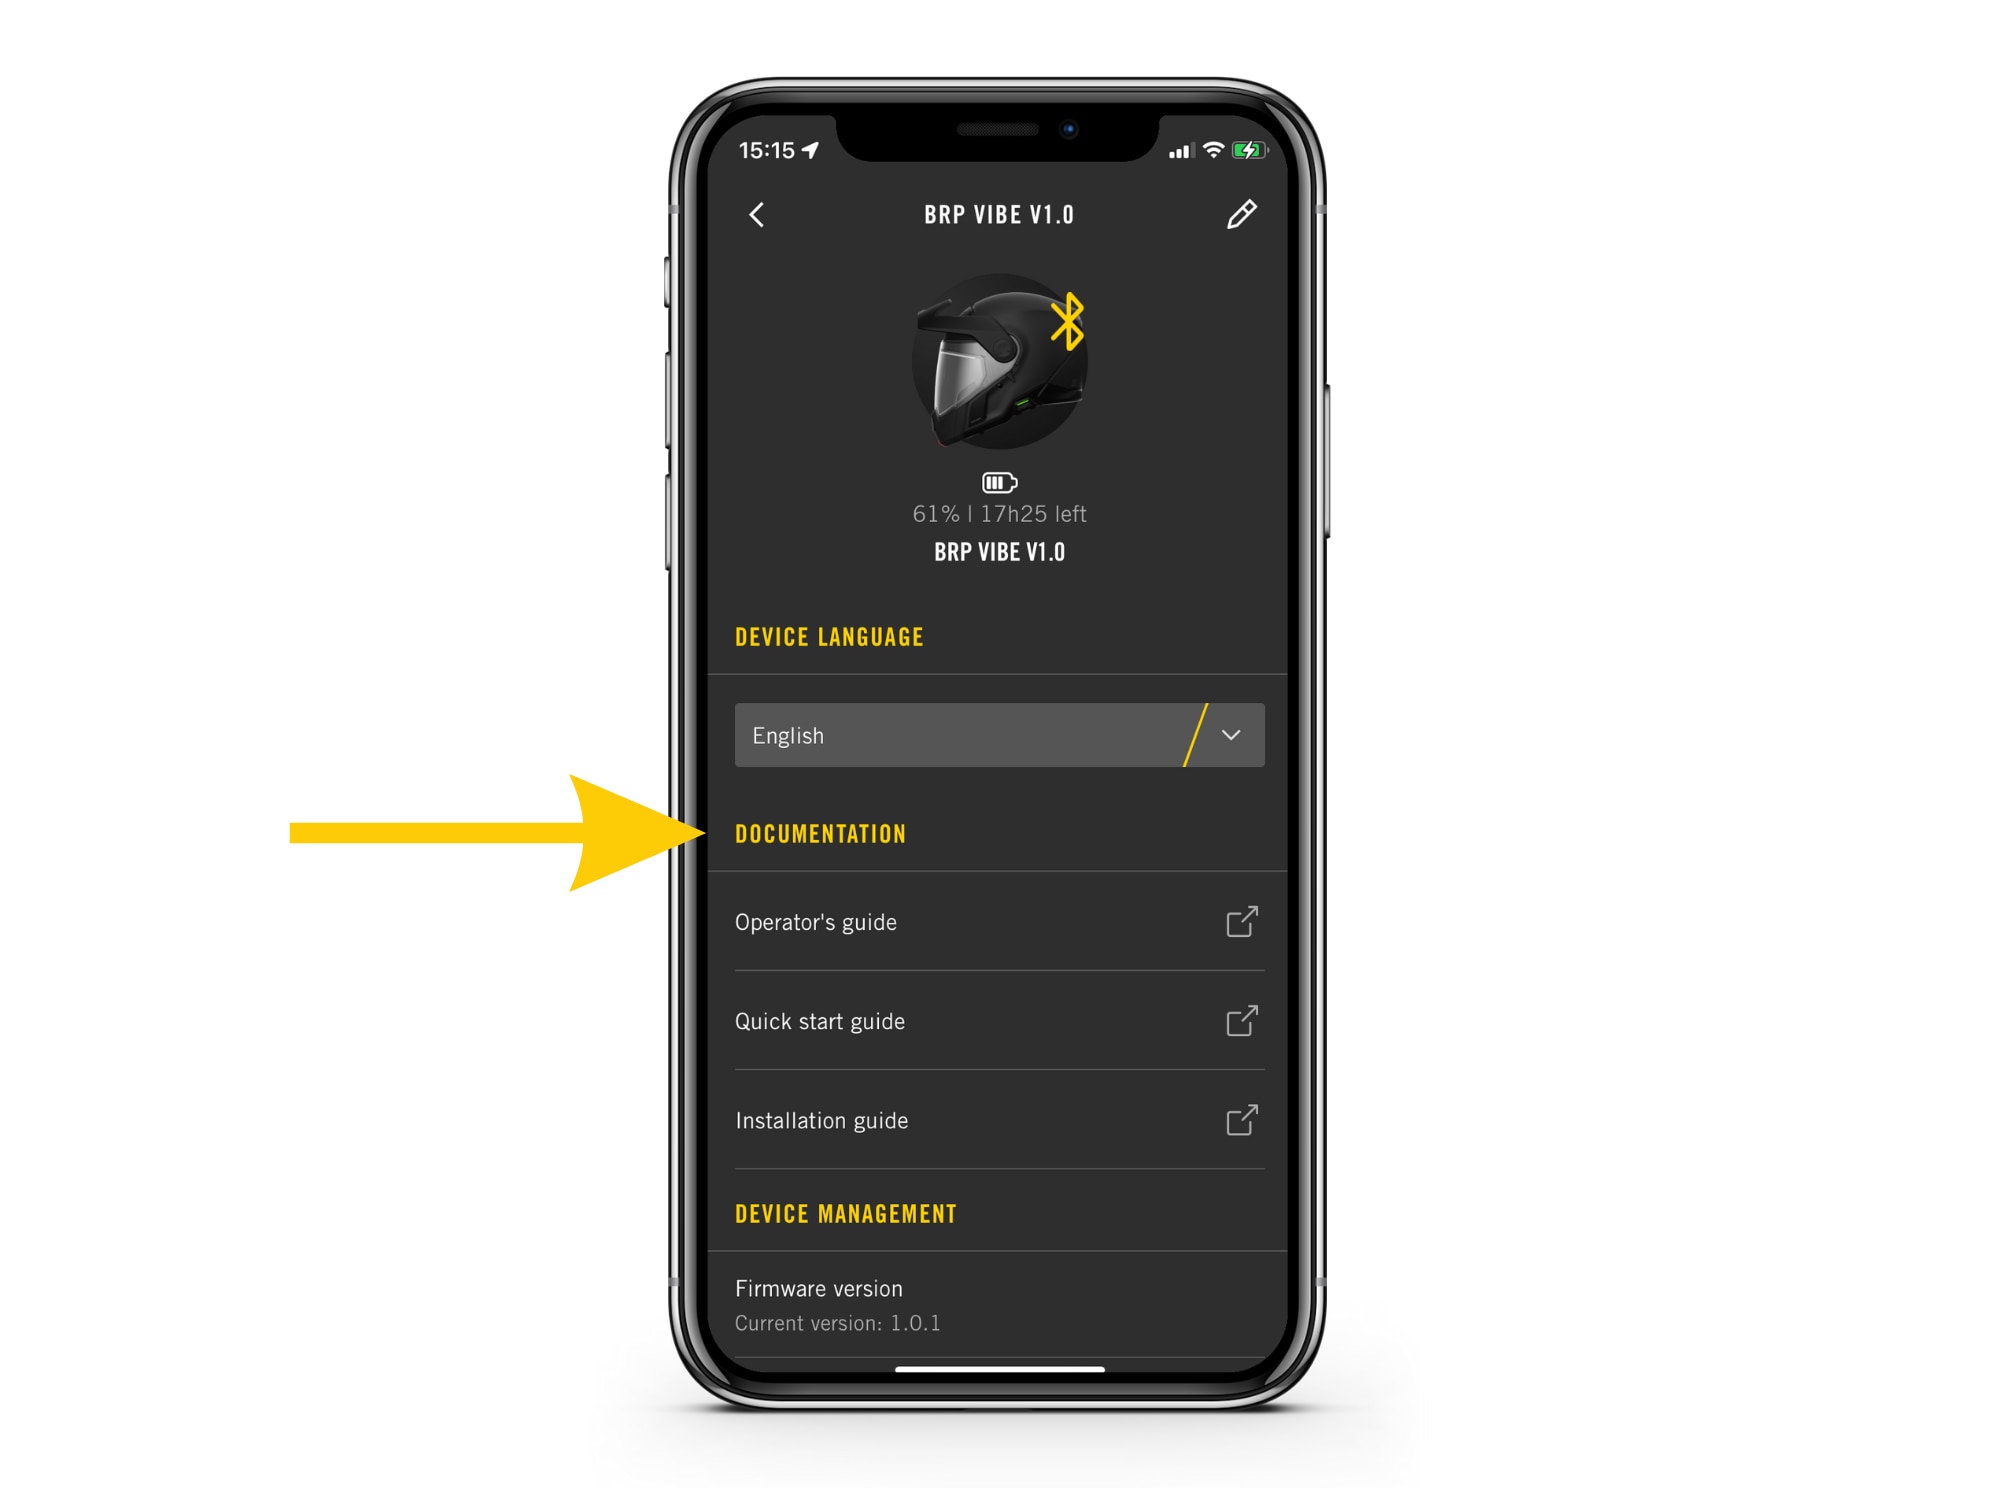 The BRP GO! app showing the Vibe device screen for full support documentation